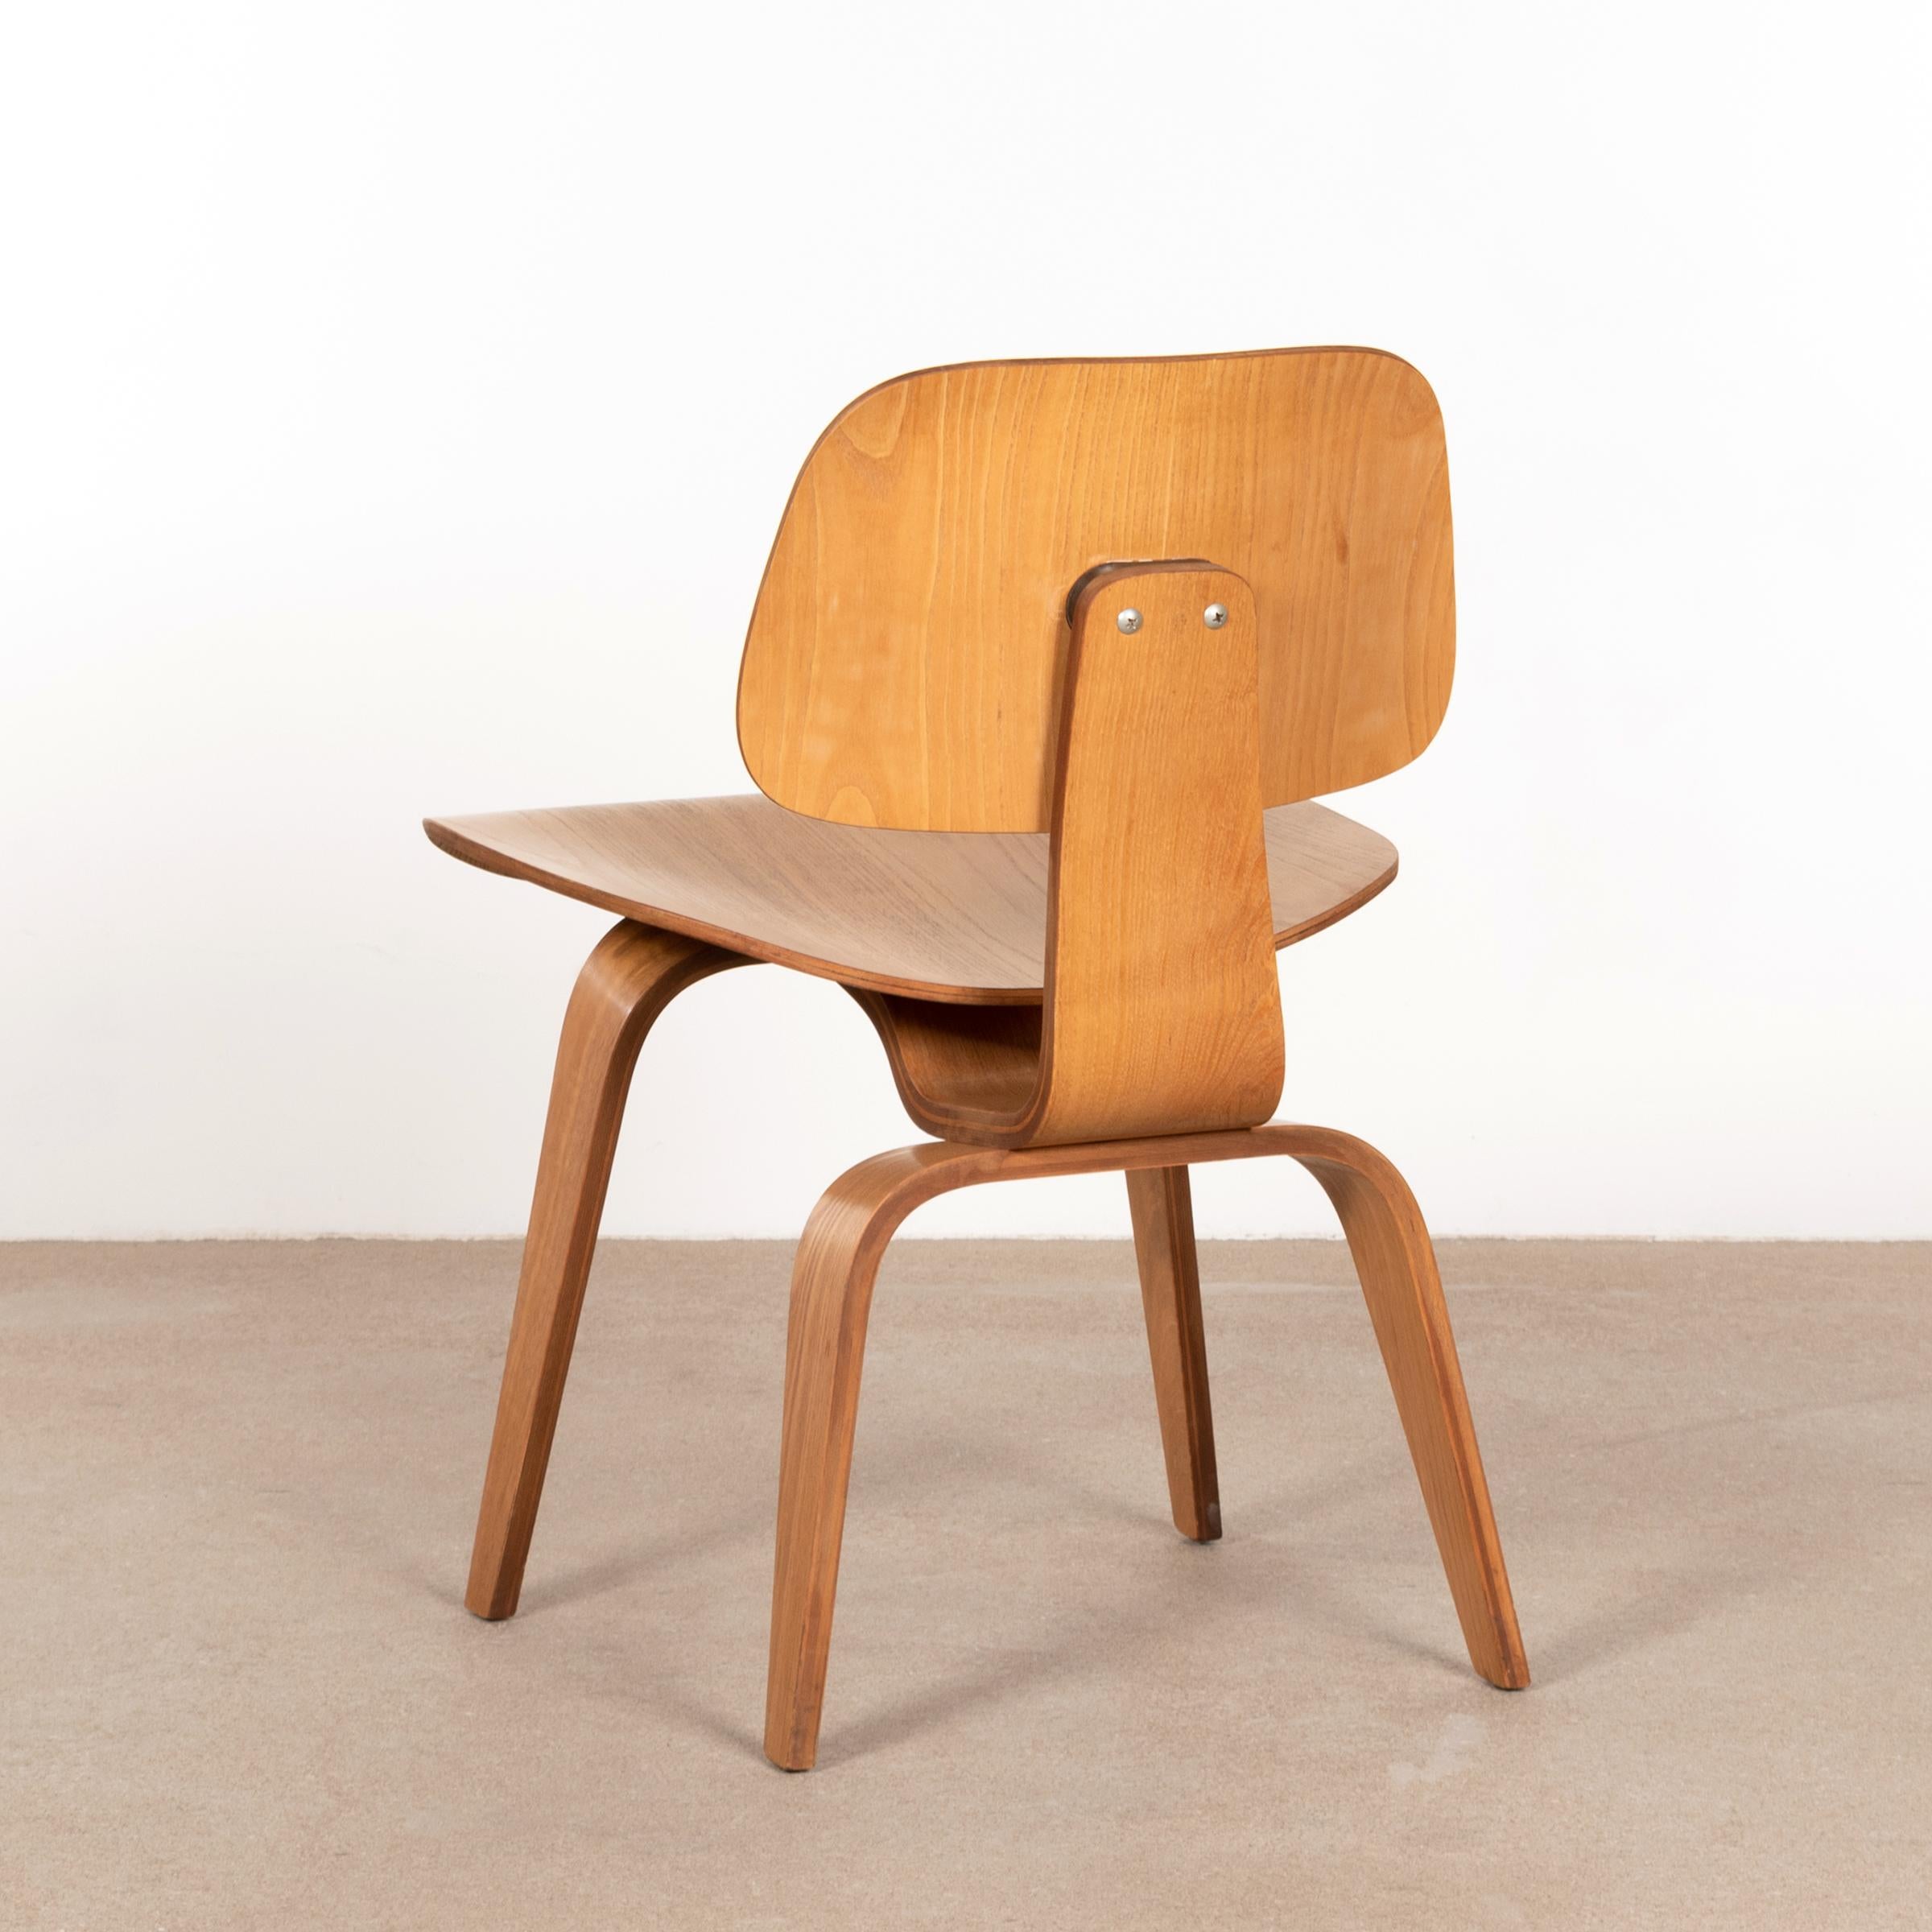 Mid-20th Century Charles and Ray Eames early DCW Ash Dining Chair for Herman Miller